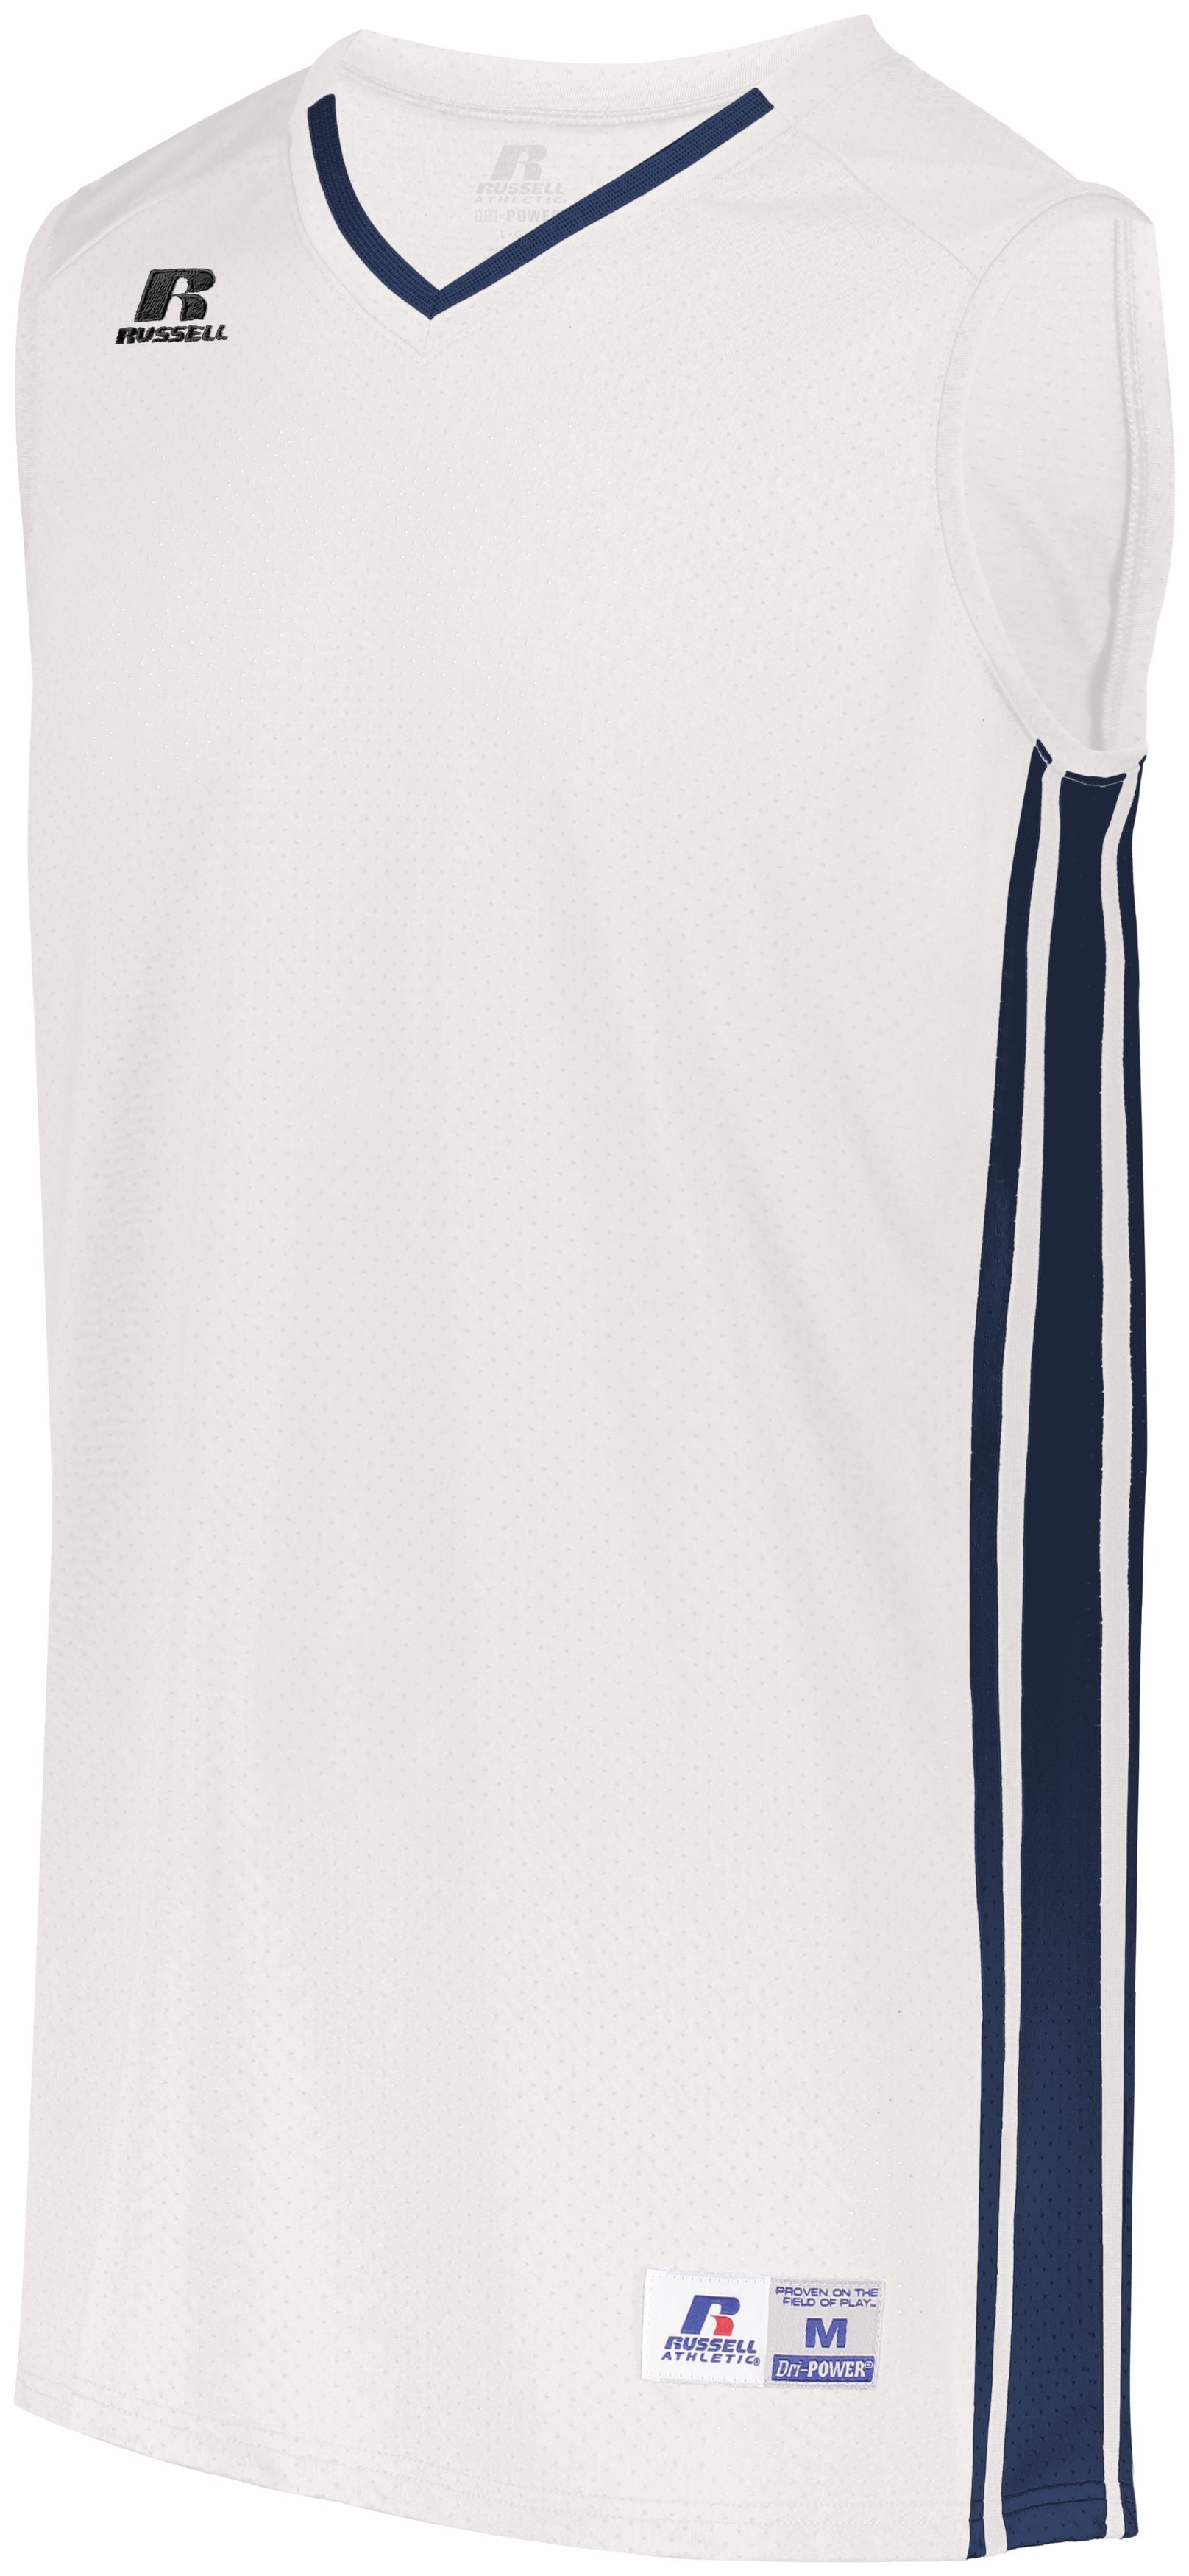 Russell Athletic Youth Legacy Basketball Jersey in White/Navy  -Part of the Youth, Youth-Jersey, Basketball, Russell-Athletic-Products, Shirts, All-Sports, All-Sports-1 product lines at KanaleyCreations.com